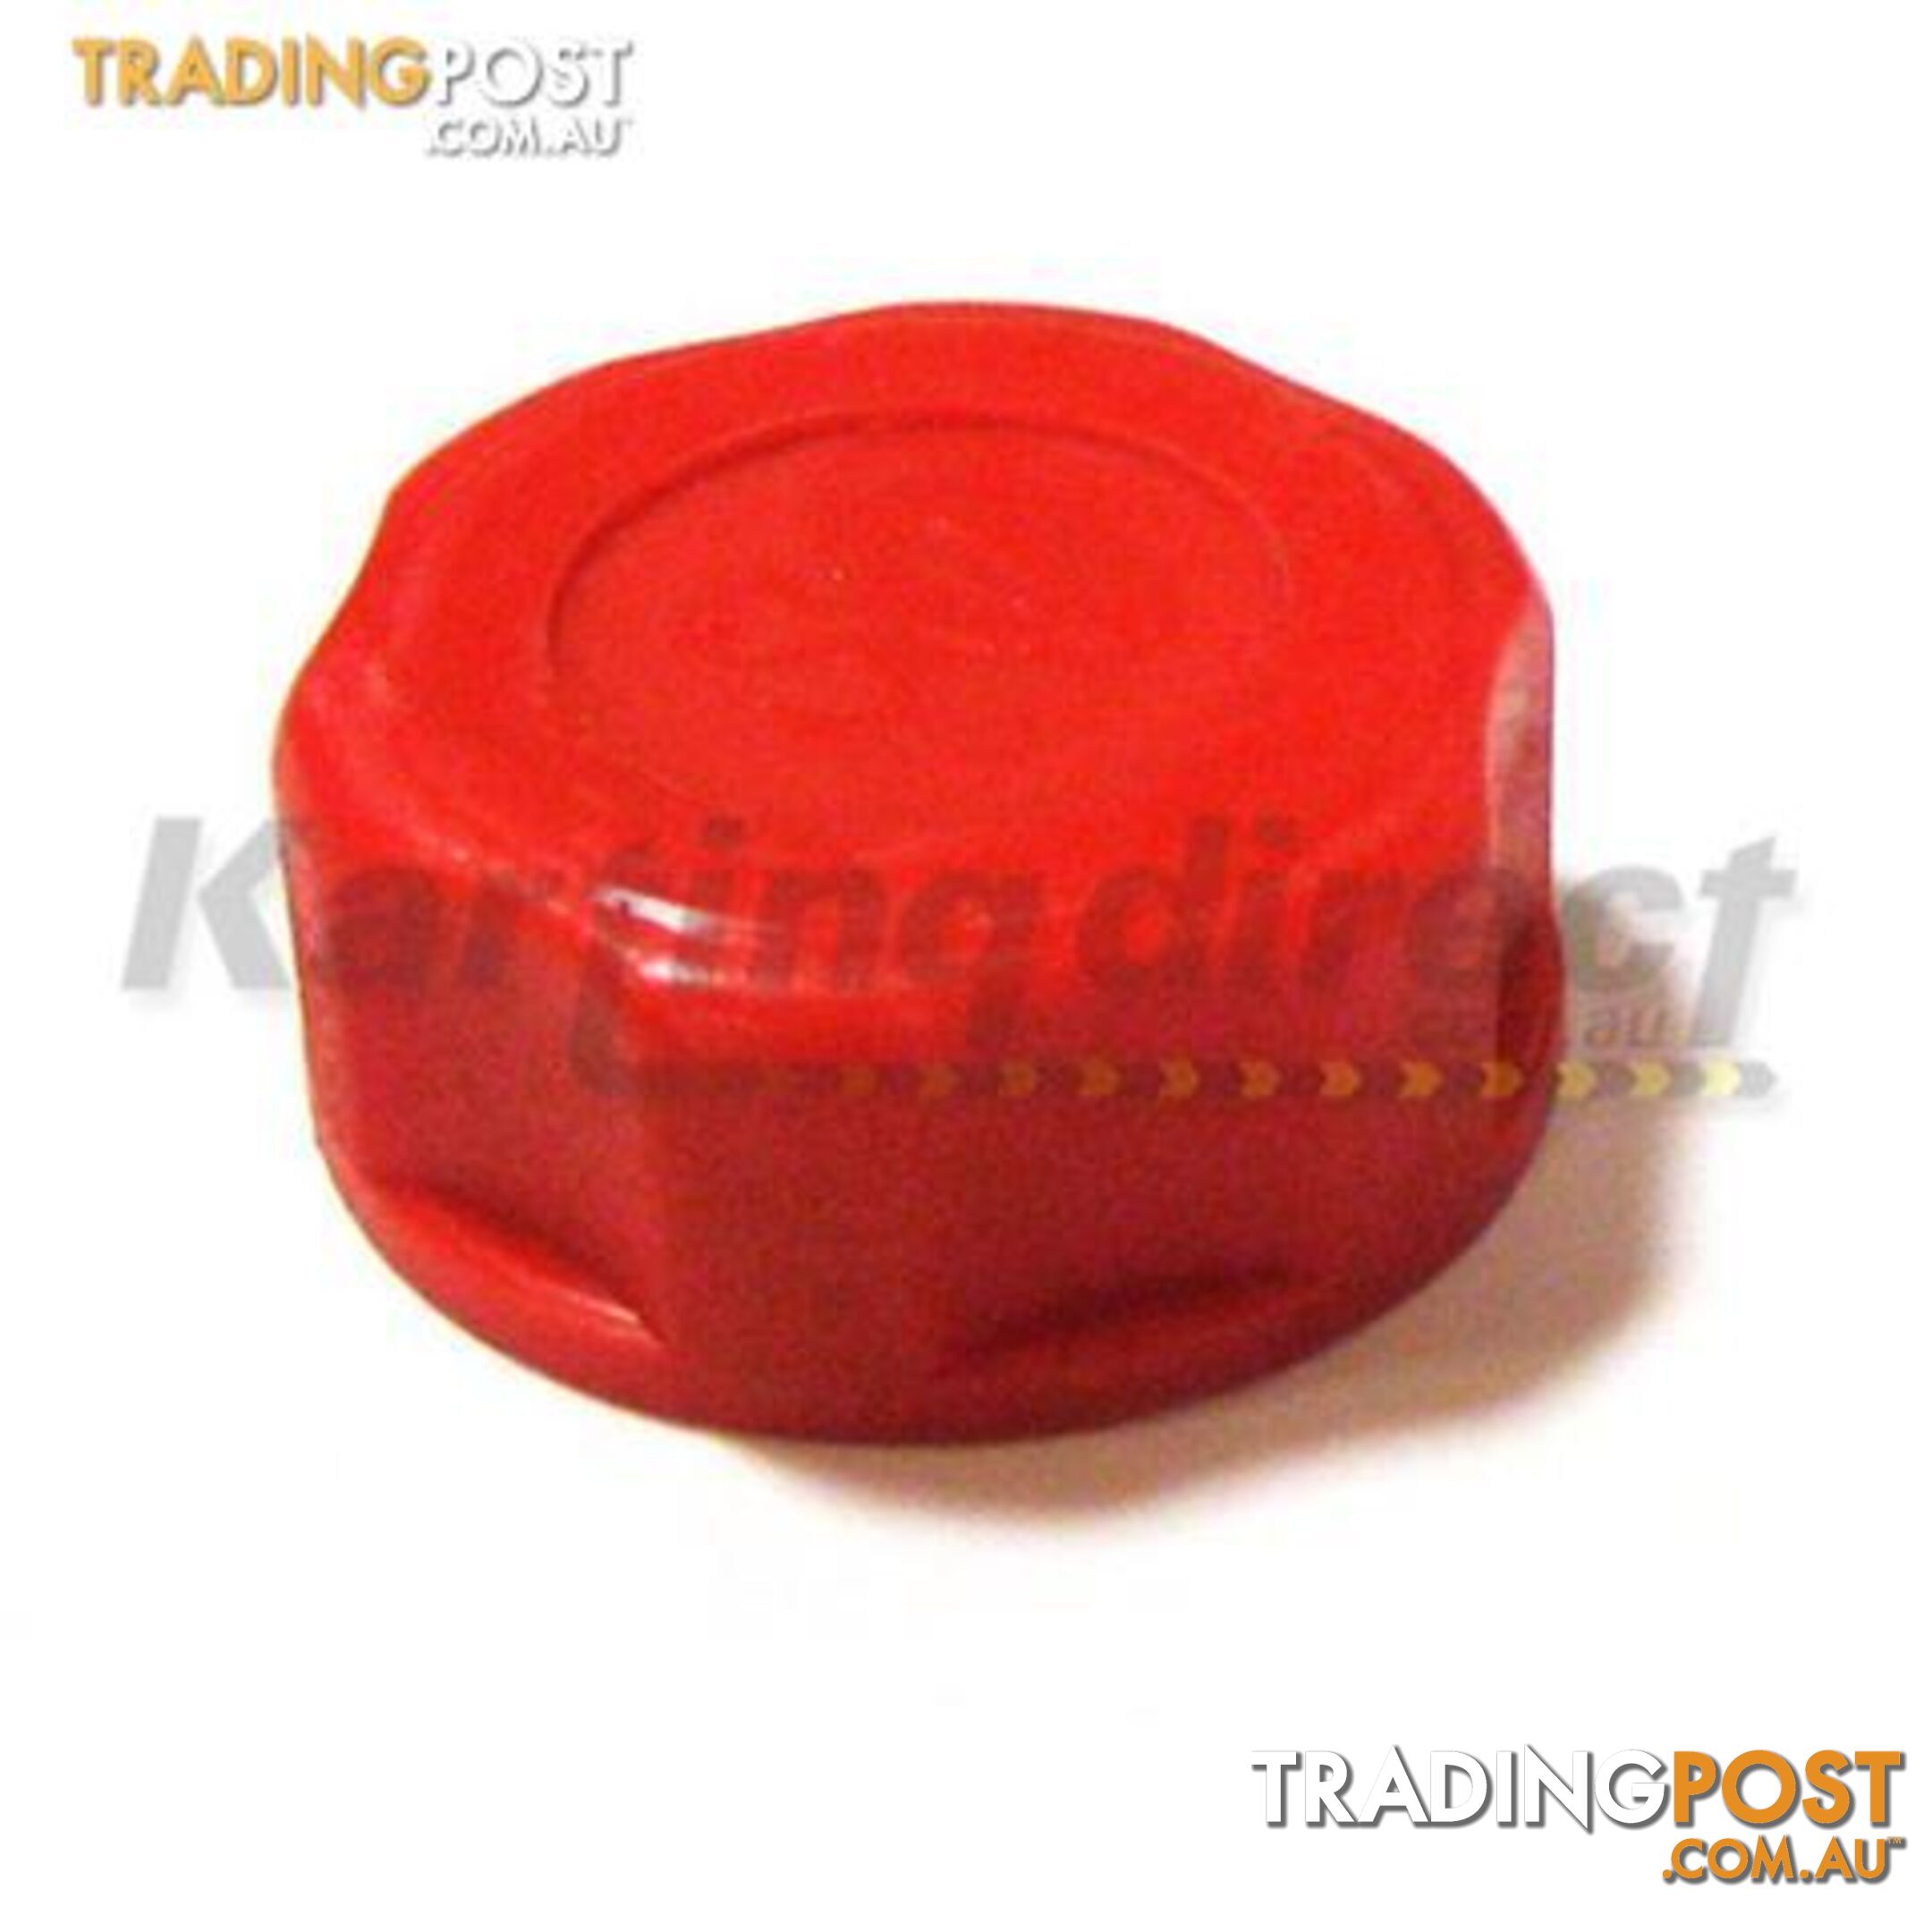 Go Kart Fuel Tank Cap  Red Plastic   Suit SQ Euro Style Tank - ALL BRAND NEW !!!